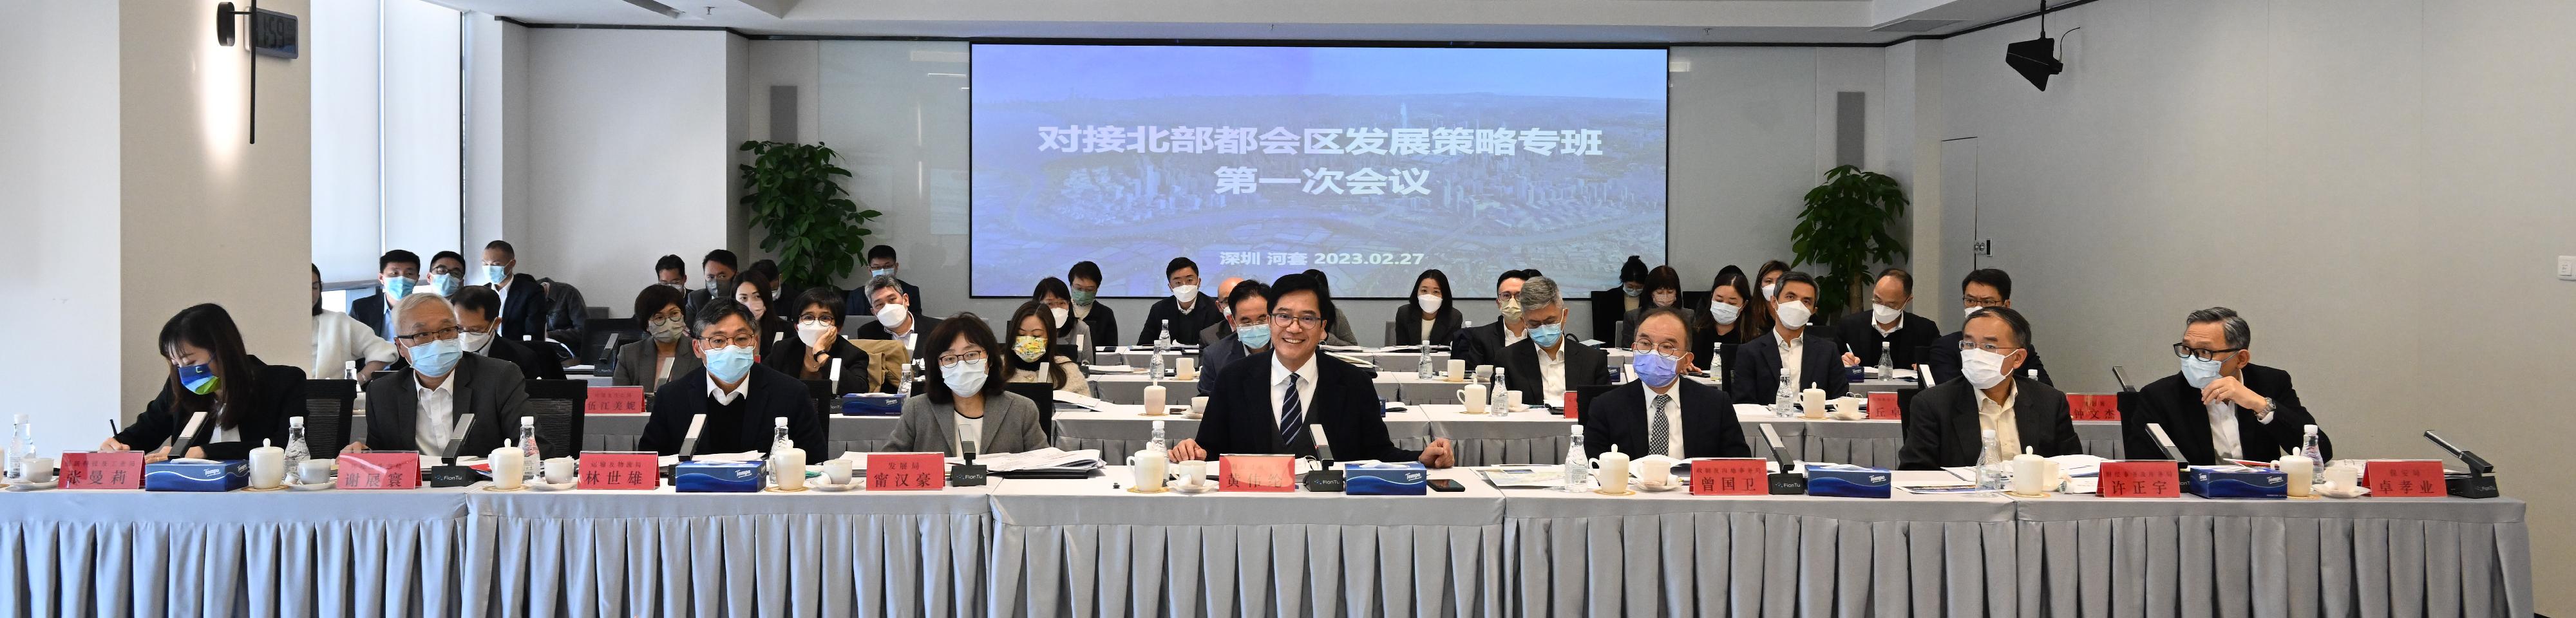 The Deputy Financial Secretary, Mr Michael Wong (first row, fourth right) and Vice Mayor of Shenzhen Municipal People's Government Mr Huang Min, leading delegations of the governments of the Hong Kong Special Administrative Region and Shenzhen respectively, held the first meeting of the Task Force for Collaboration on the Northern Metropolis Development Strategy in Shenzhen today (February 27). Also attending are the Acting Secretary for Security, Mr Michael Cheuk (first row, first right); the Secretary for Financial Services and the Treasury, Mr Christopher Hui (first row, second right); the Secretary for Constitutional and Mainland Affairs, Mr Erick Tsang Kwok-wai (first row, third right); the Secretary for Development, Ms Bernadette Linn (first row, fourth left); the Secretary for Transport and Logistics, Mr Lam Sai-hung (first row, third left); the Secretary for Environment and Ecology, Mr Tse Chin-wan (first row, second left); and the Under Secretary for Innovation, Technology and Industry, Ms Lillian Cheong (first row, first left). 
